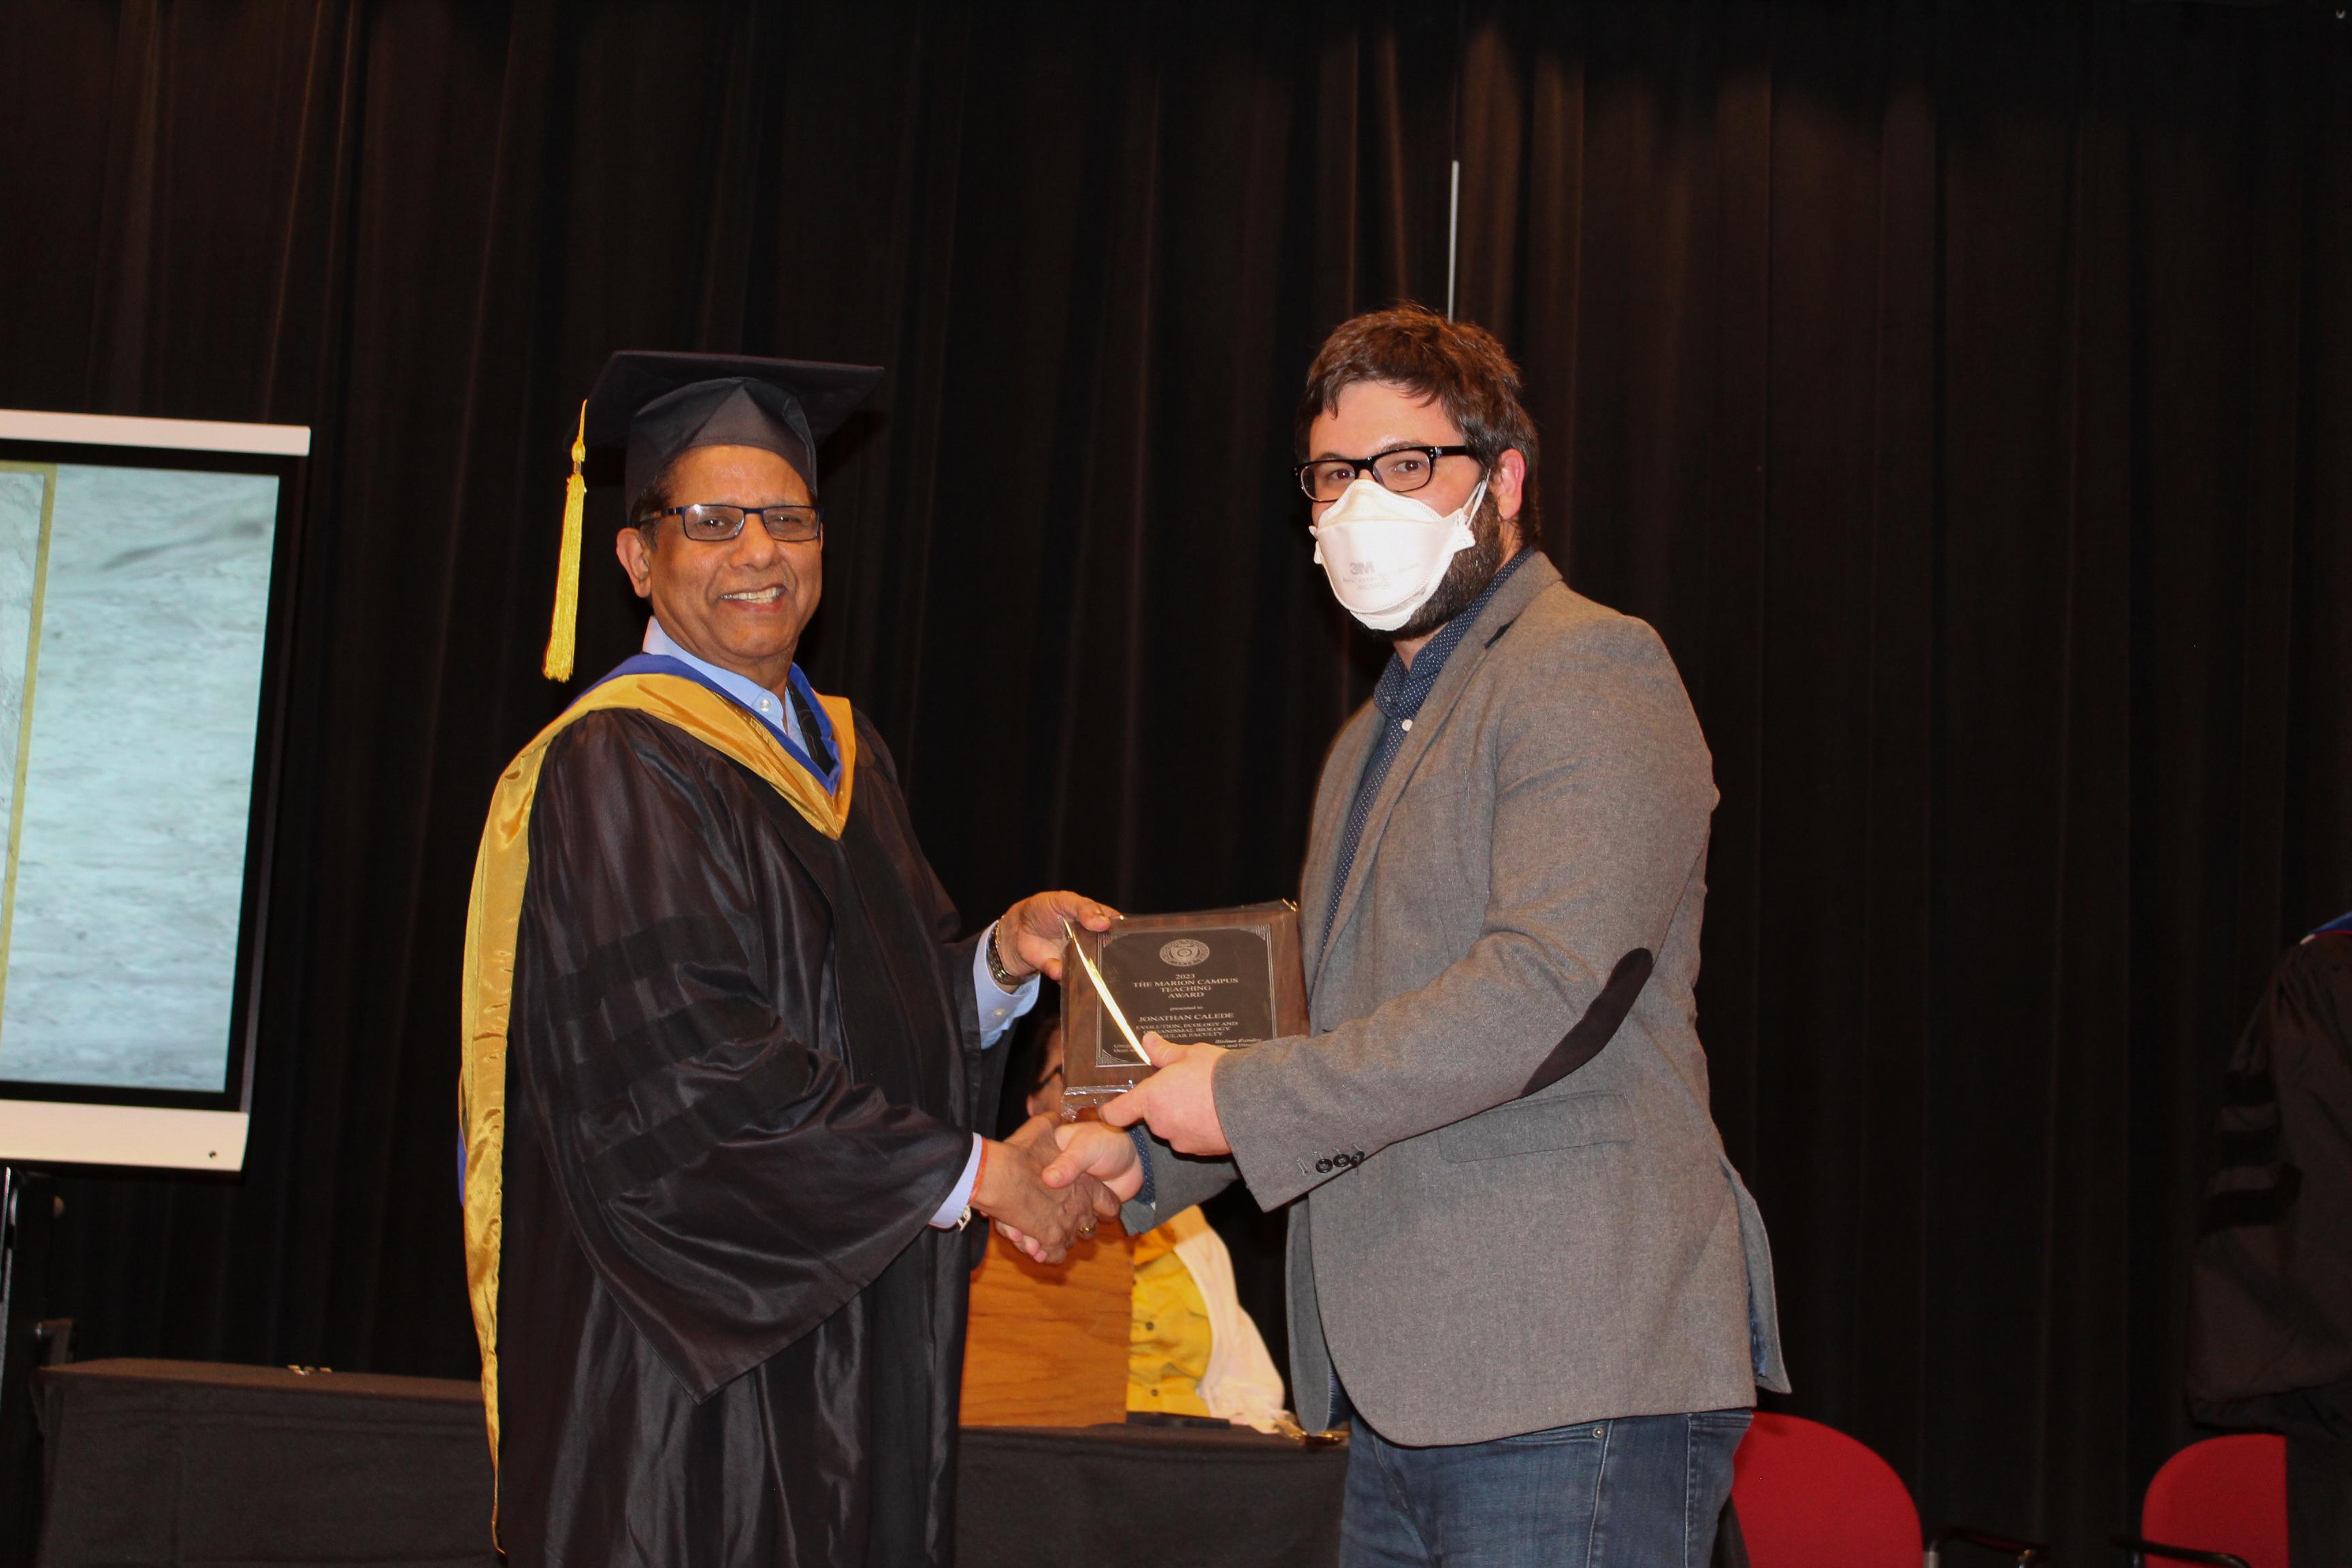 Man accepts academic award and shakes hand with man in academic regalia